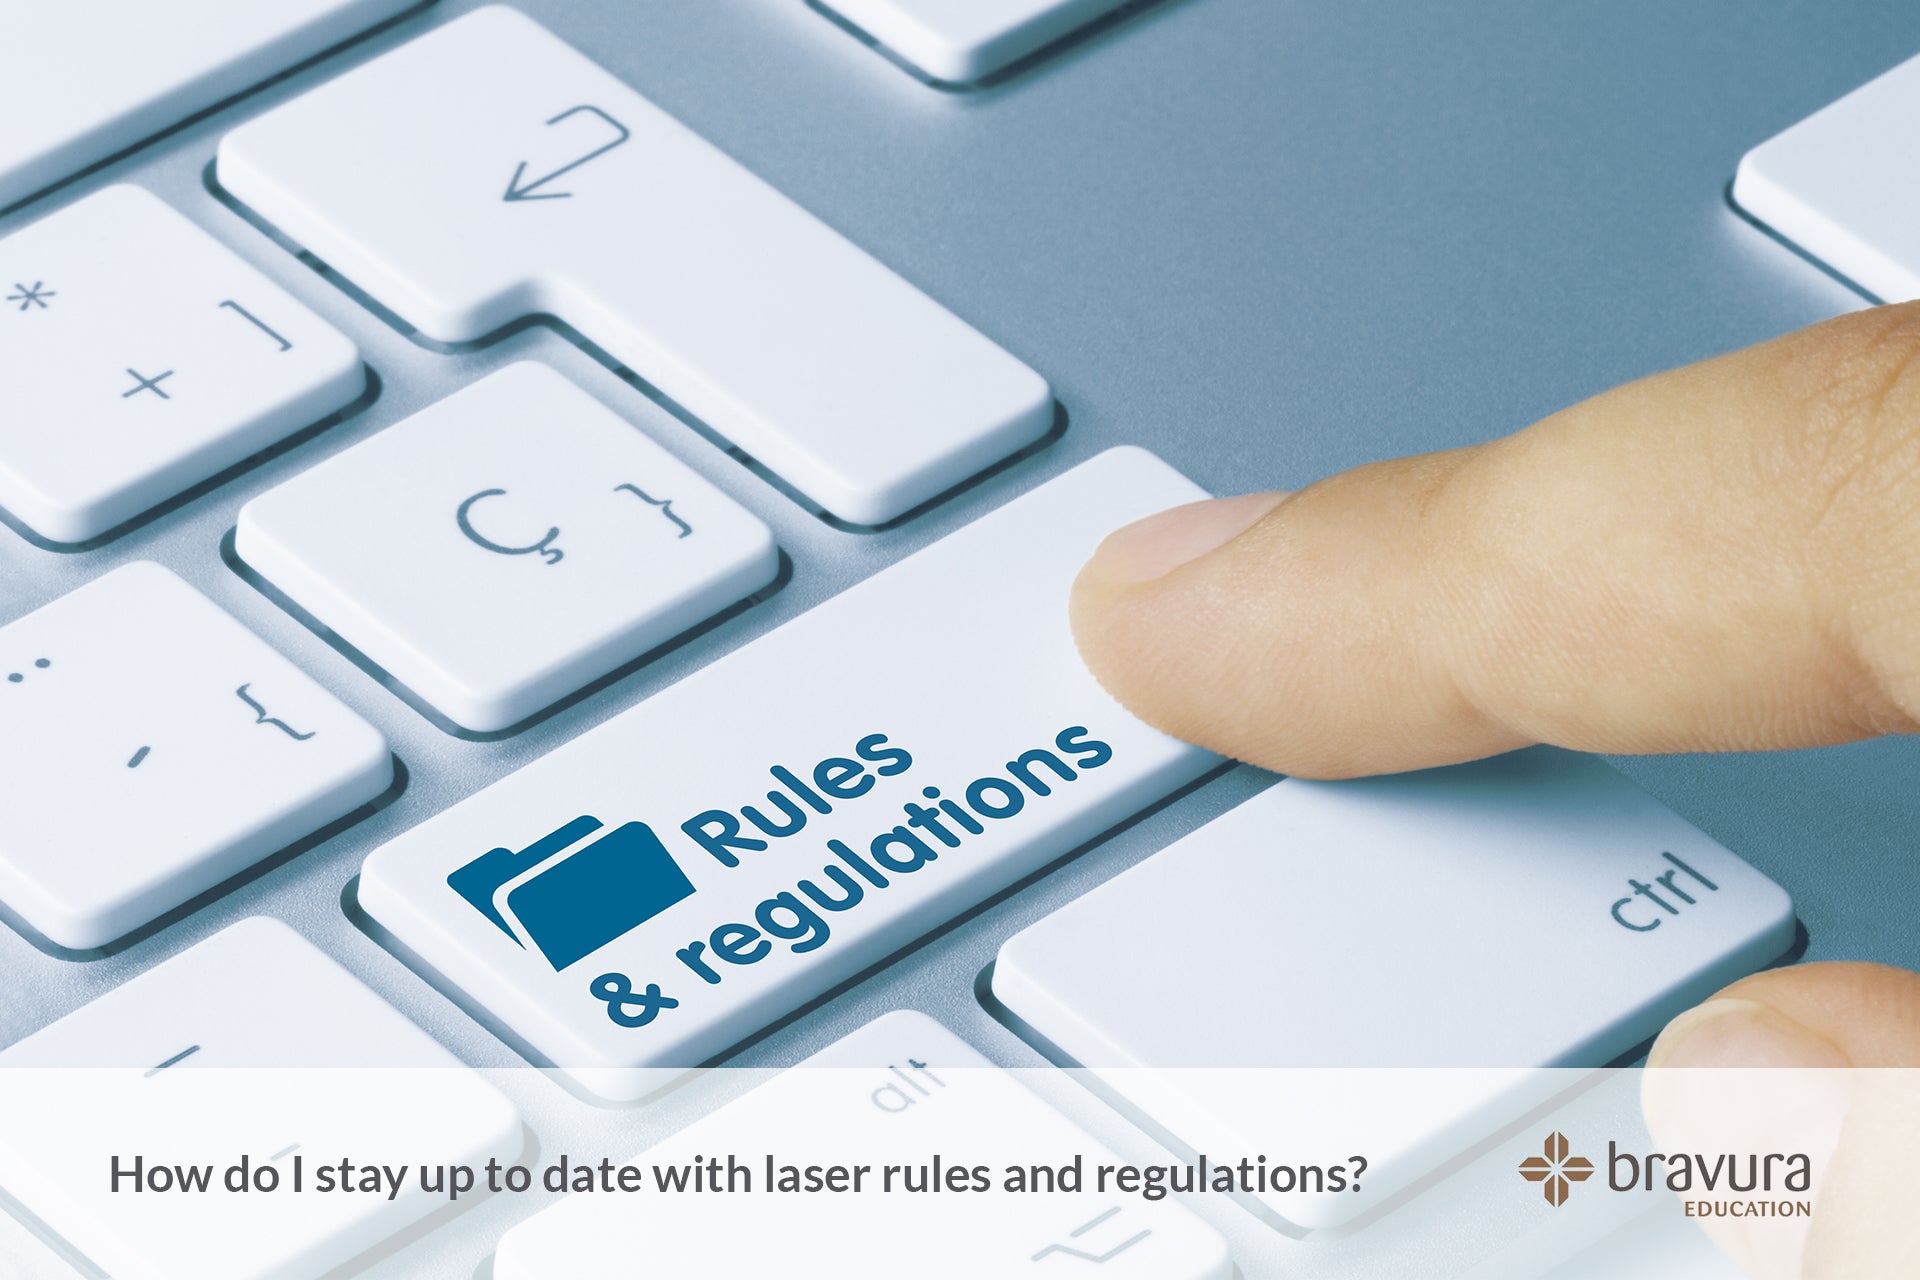 Stay up to date with laser rules and regulations